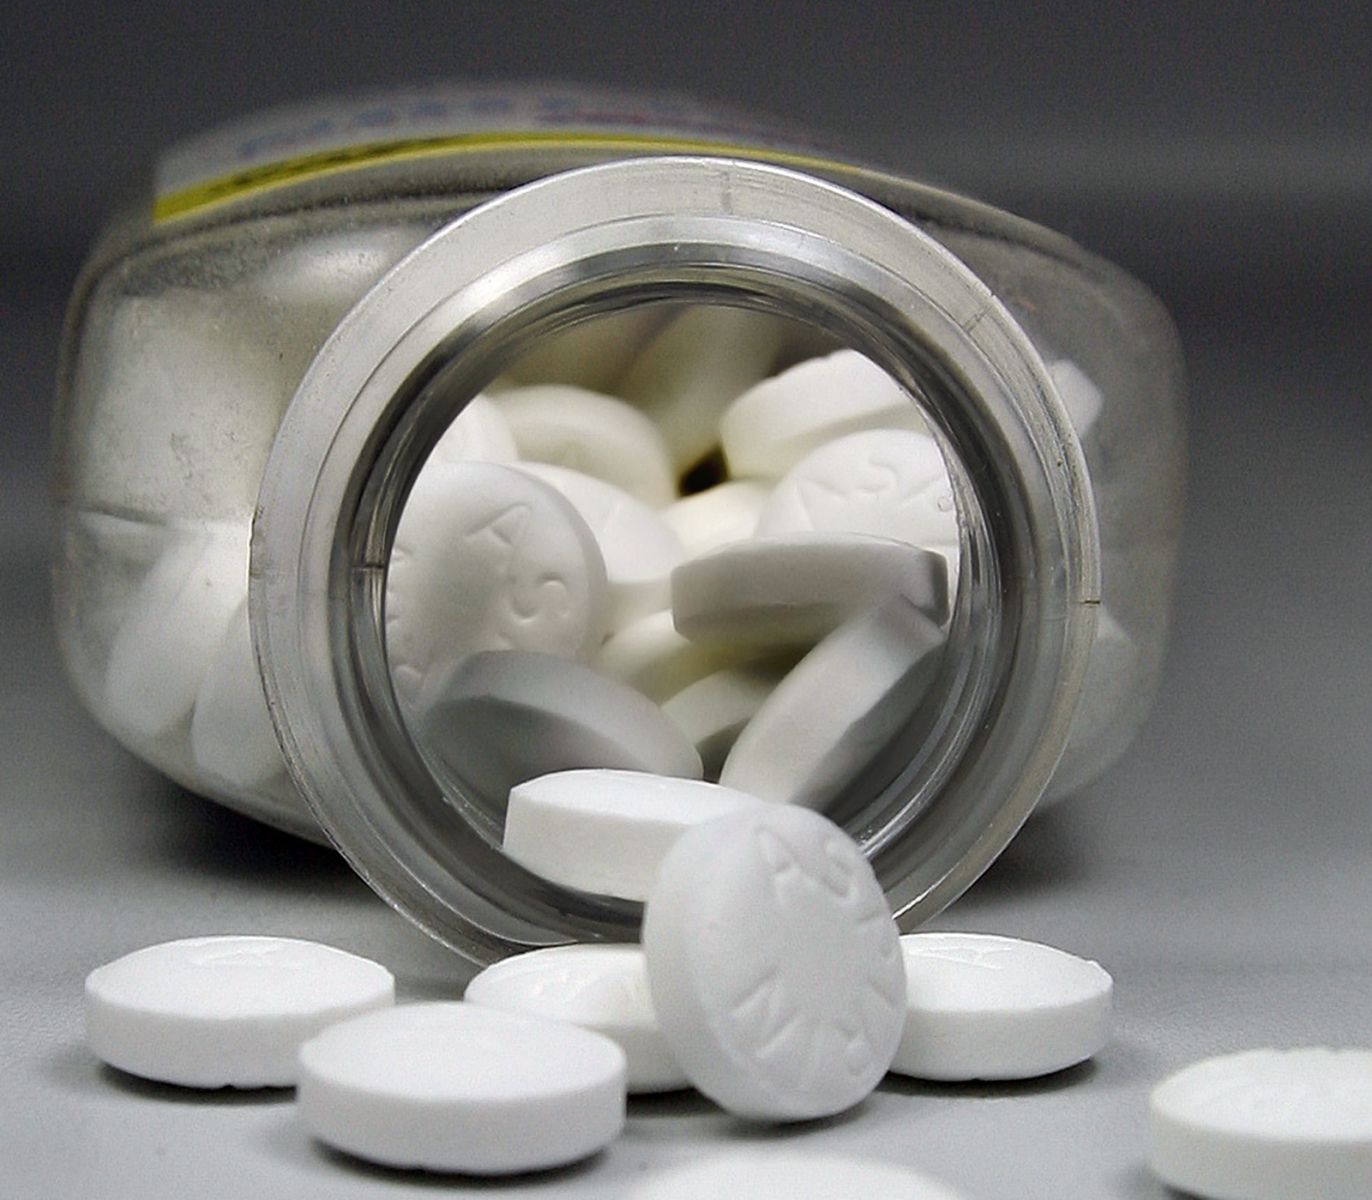 Aspirin for heart attack: Chew or swallow?